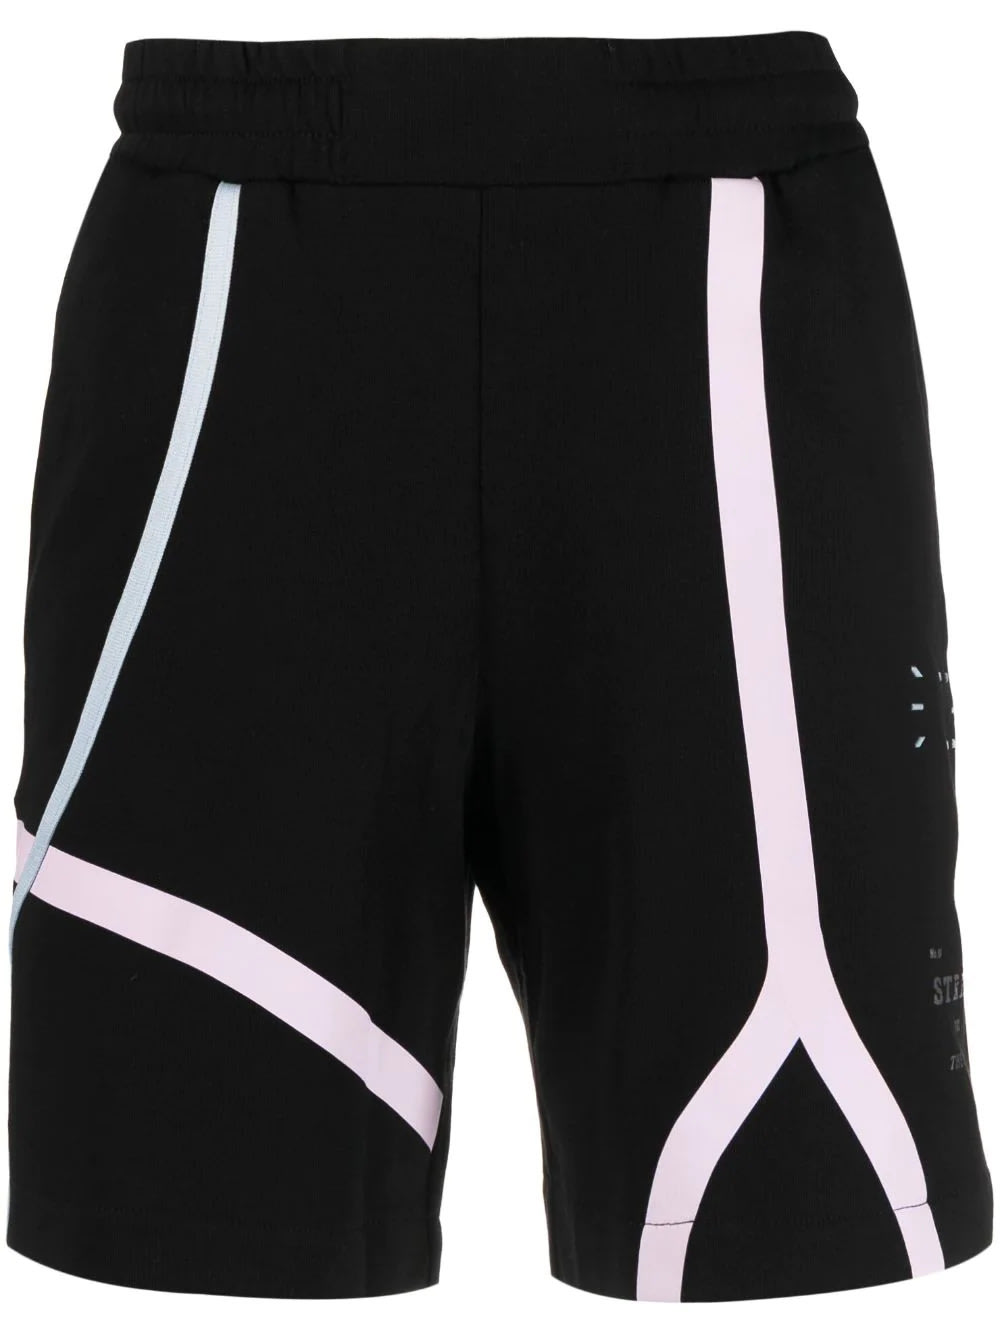 McQ Alexander McQueen Man Black Sports Shorts With Decorative Stitching And Prints